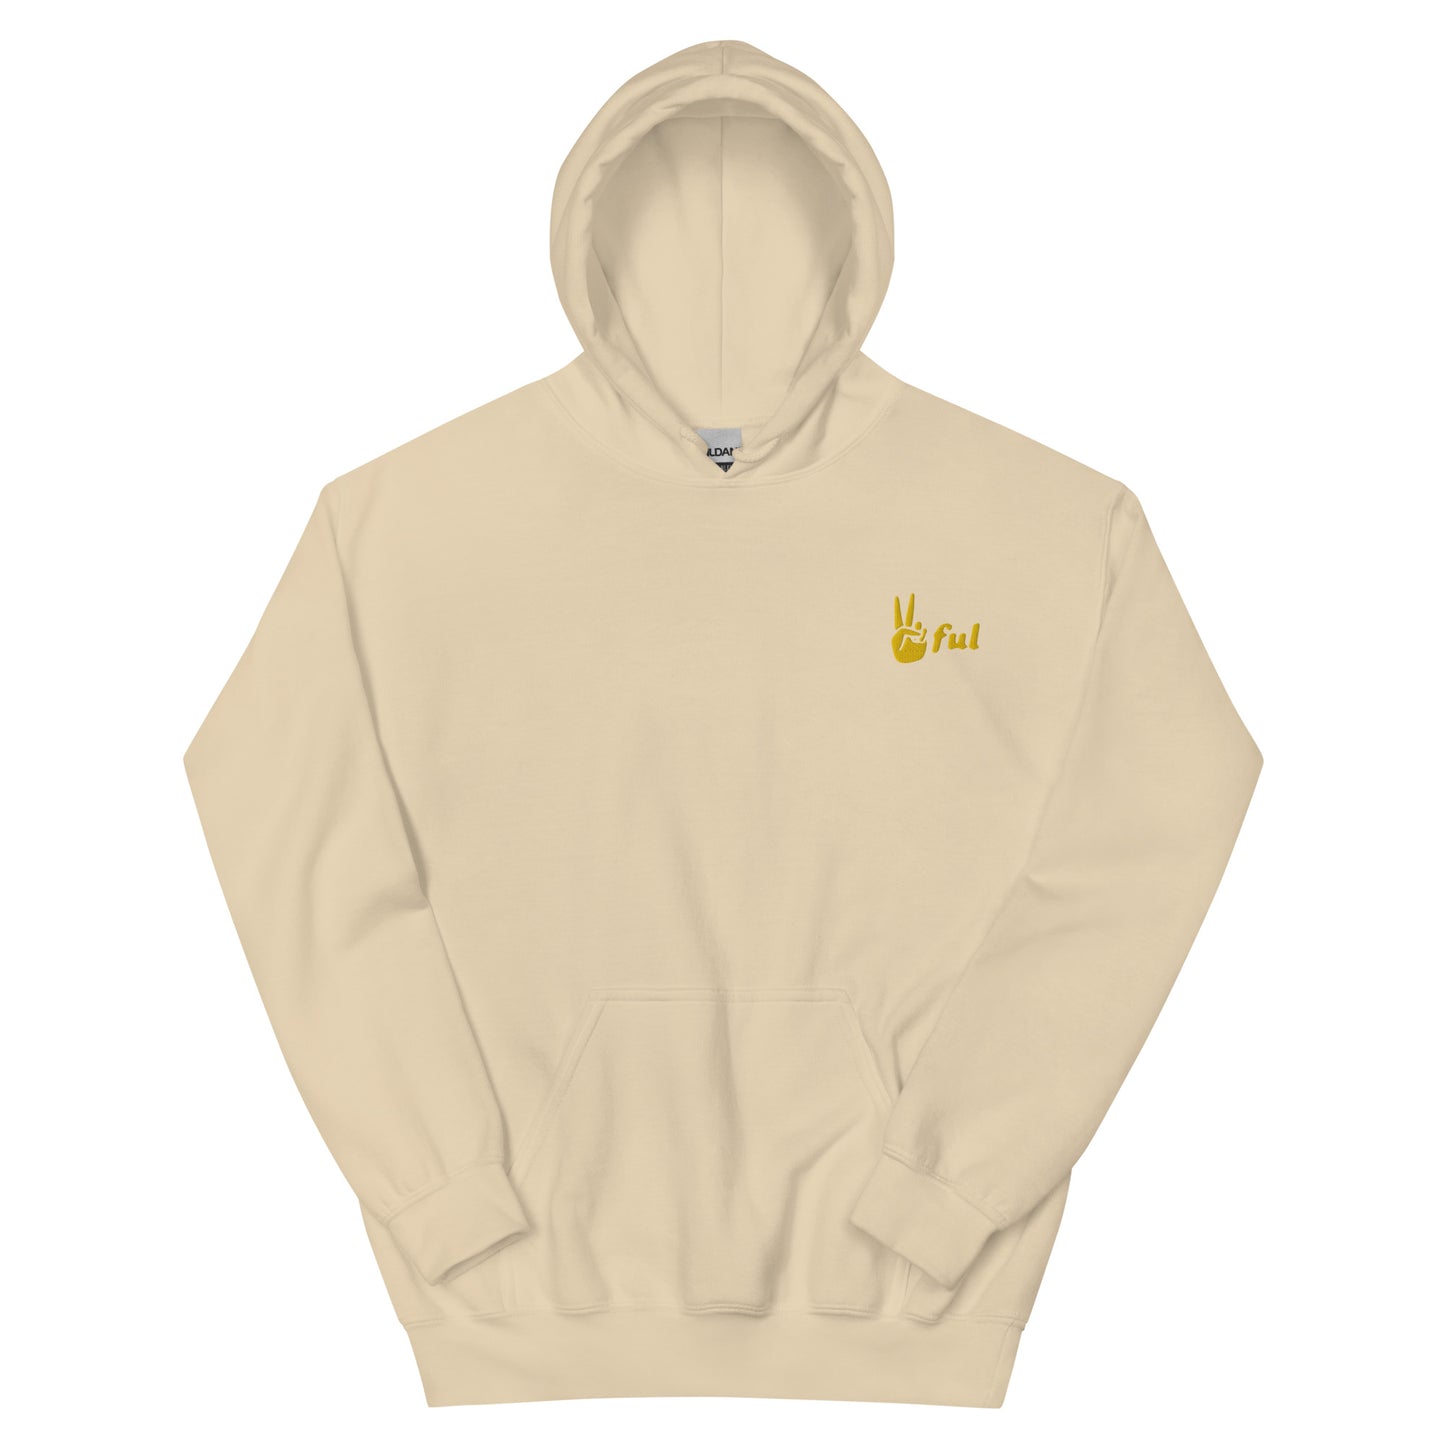 Peaceful Yellow Embroidered Unisex Hoodie